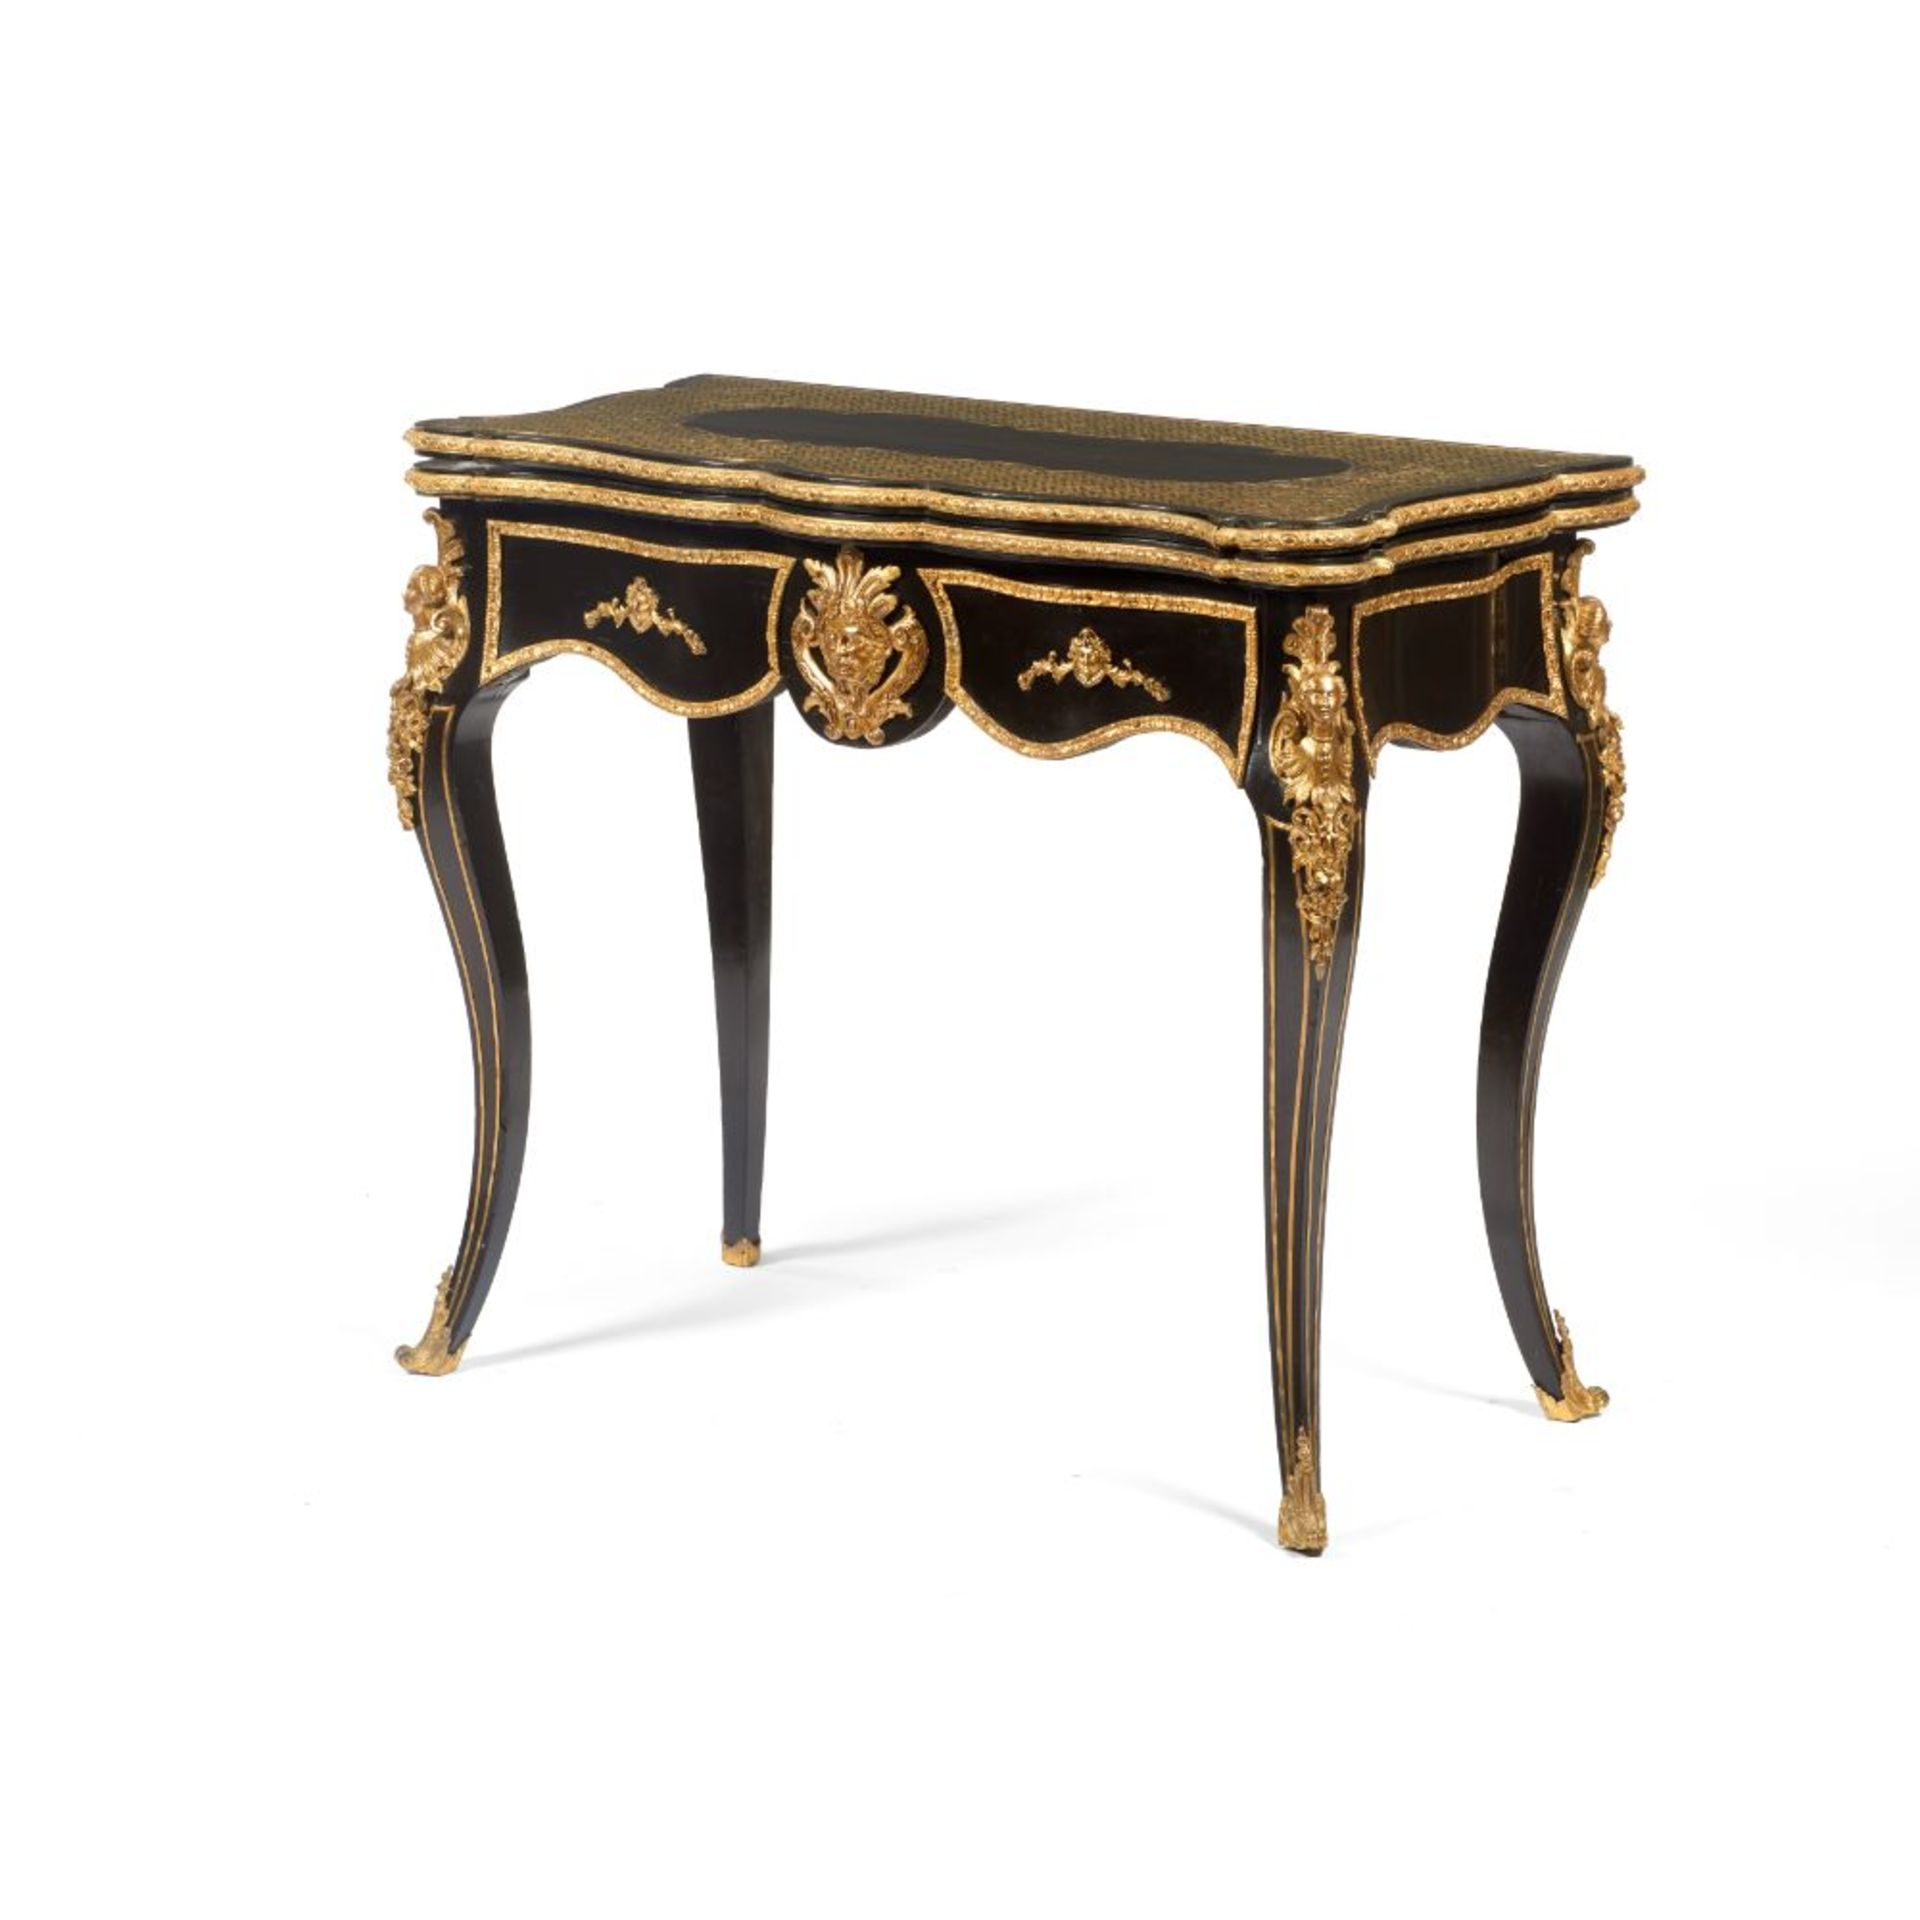 A Napoleon III card table, Ebonised wood, Yellow metal marquetry decoration, Gilt and chiselled